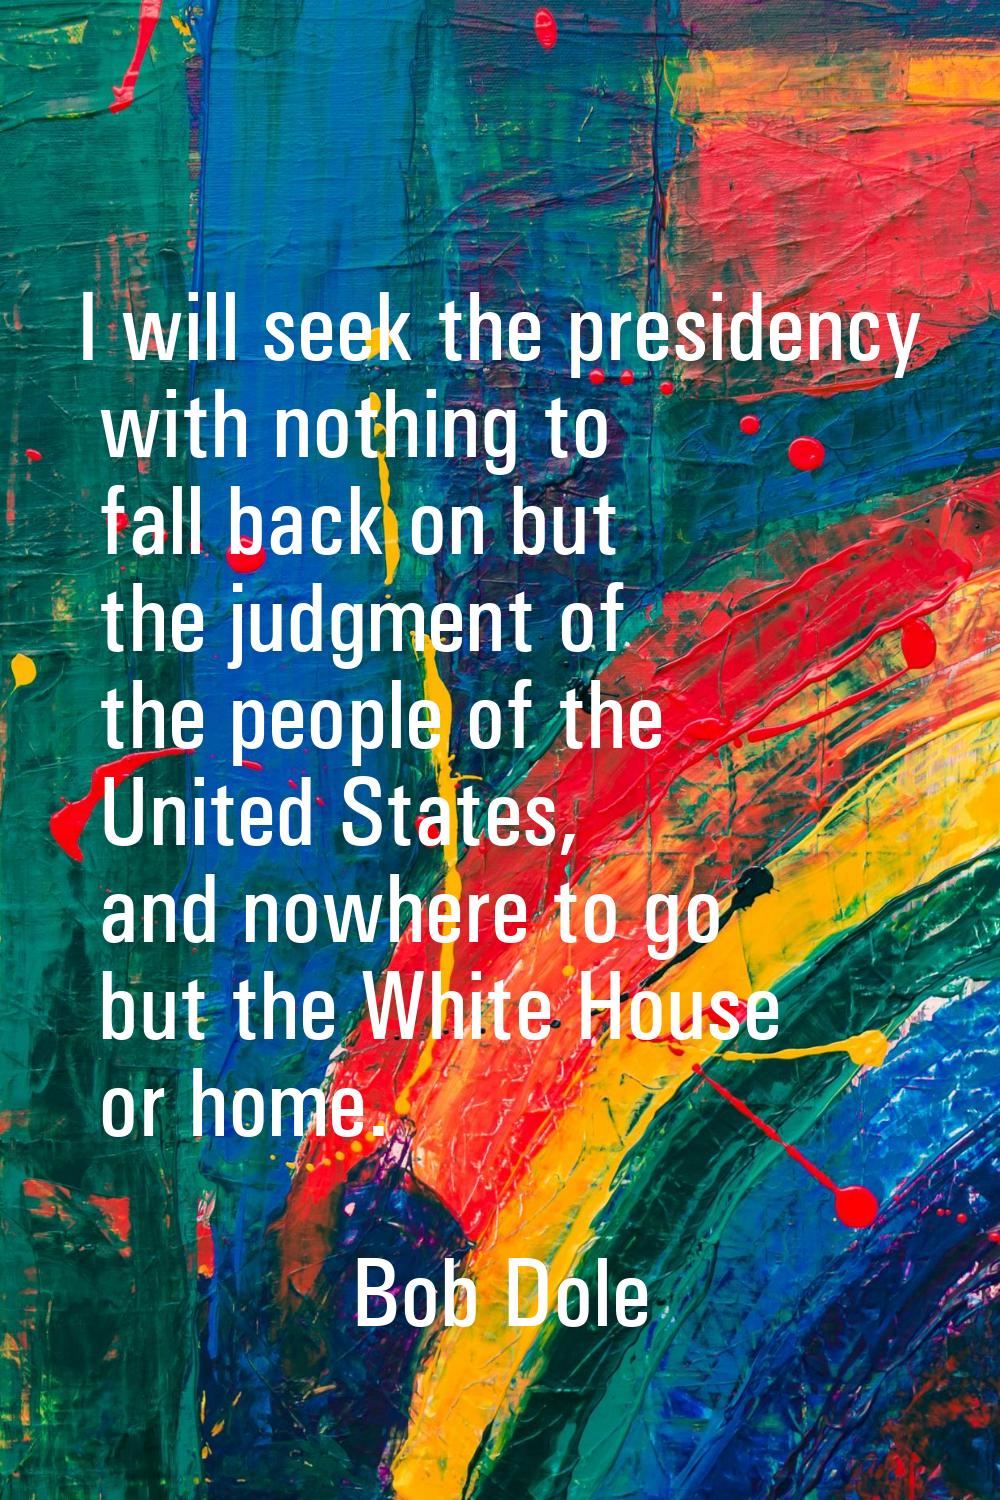 I will seek the presidency with nothing to fall back on but the judgment of the people of the Unite